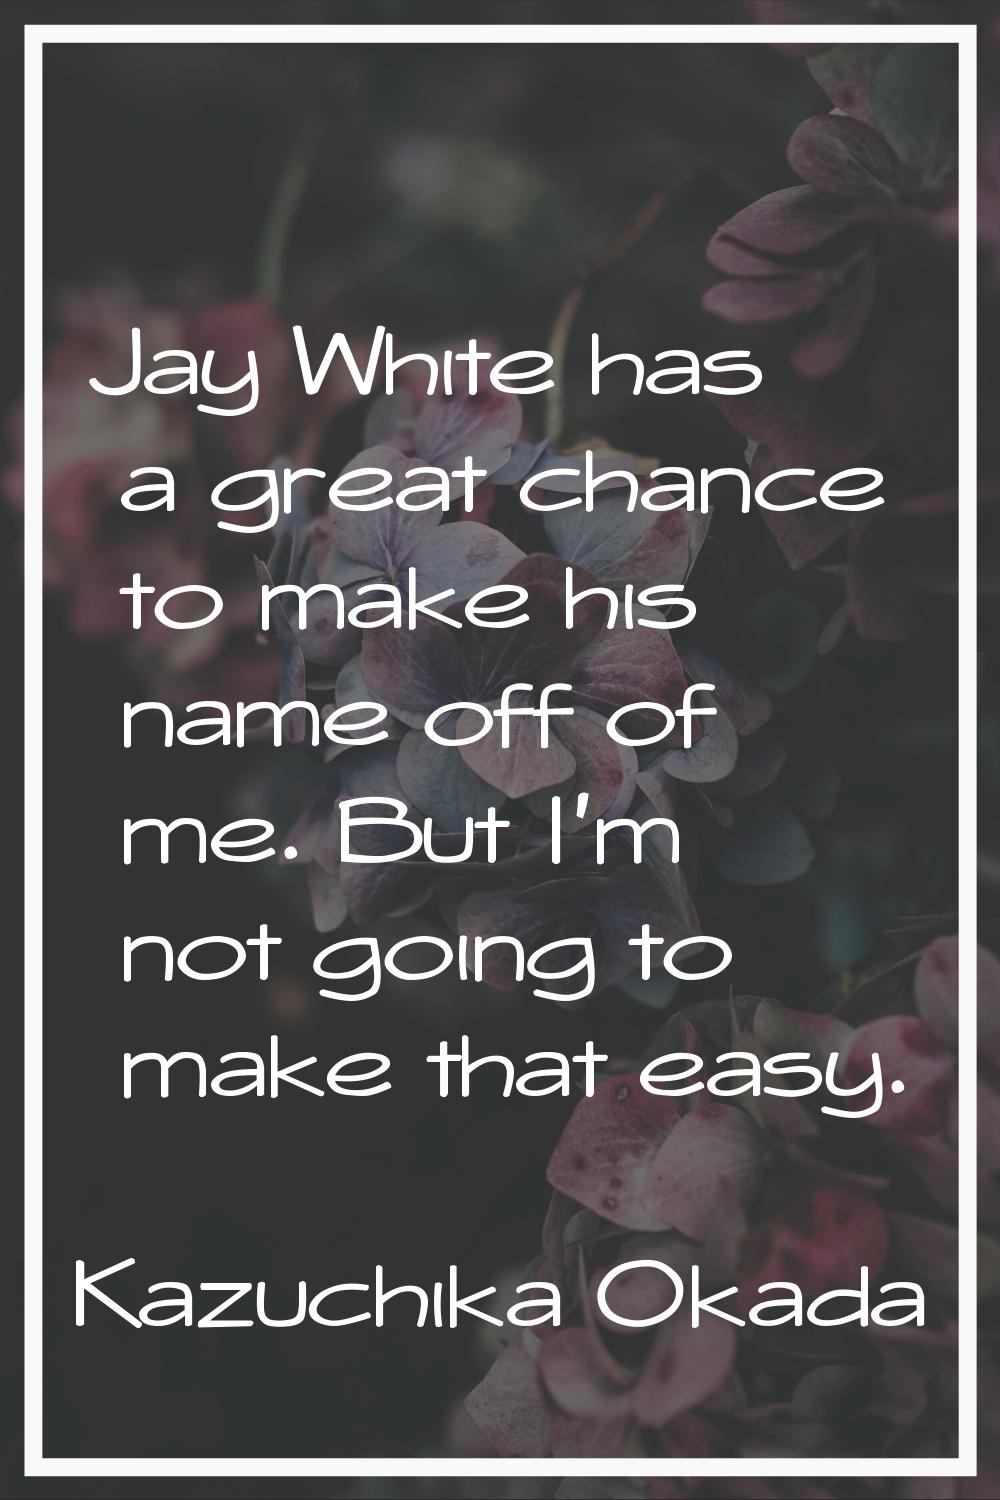 Jay White has a great chance to make his name off of me. But I'm not going to make that easy.